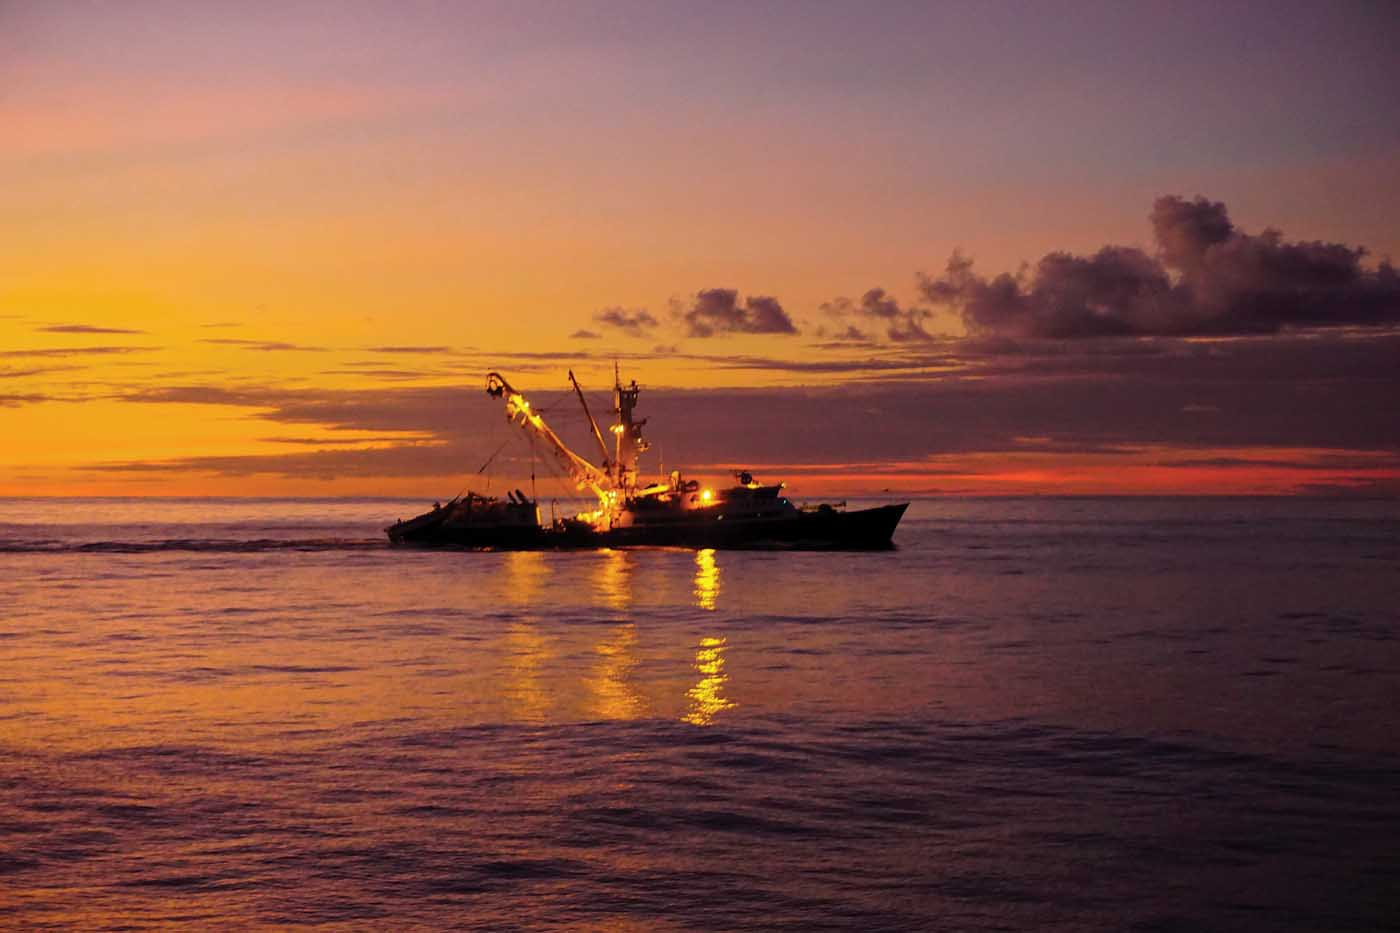 Working from such a remote location in the middle of the Pacific Ocean provided the opportunity to take in some spectacular sunsets. Matthew Hayes Photo